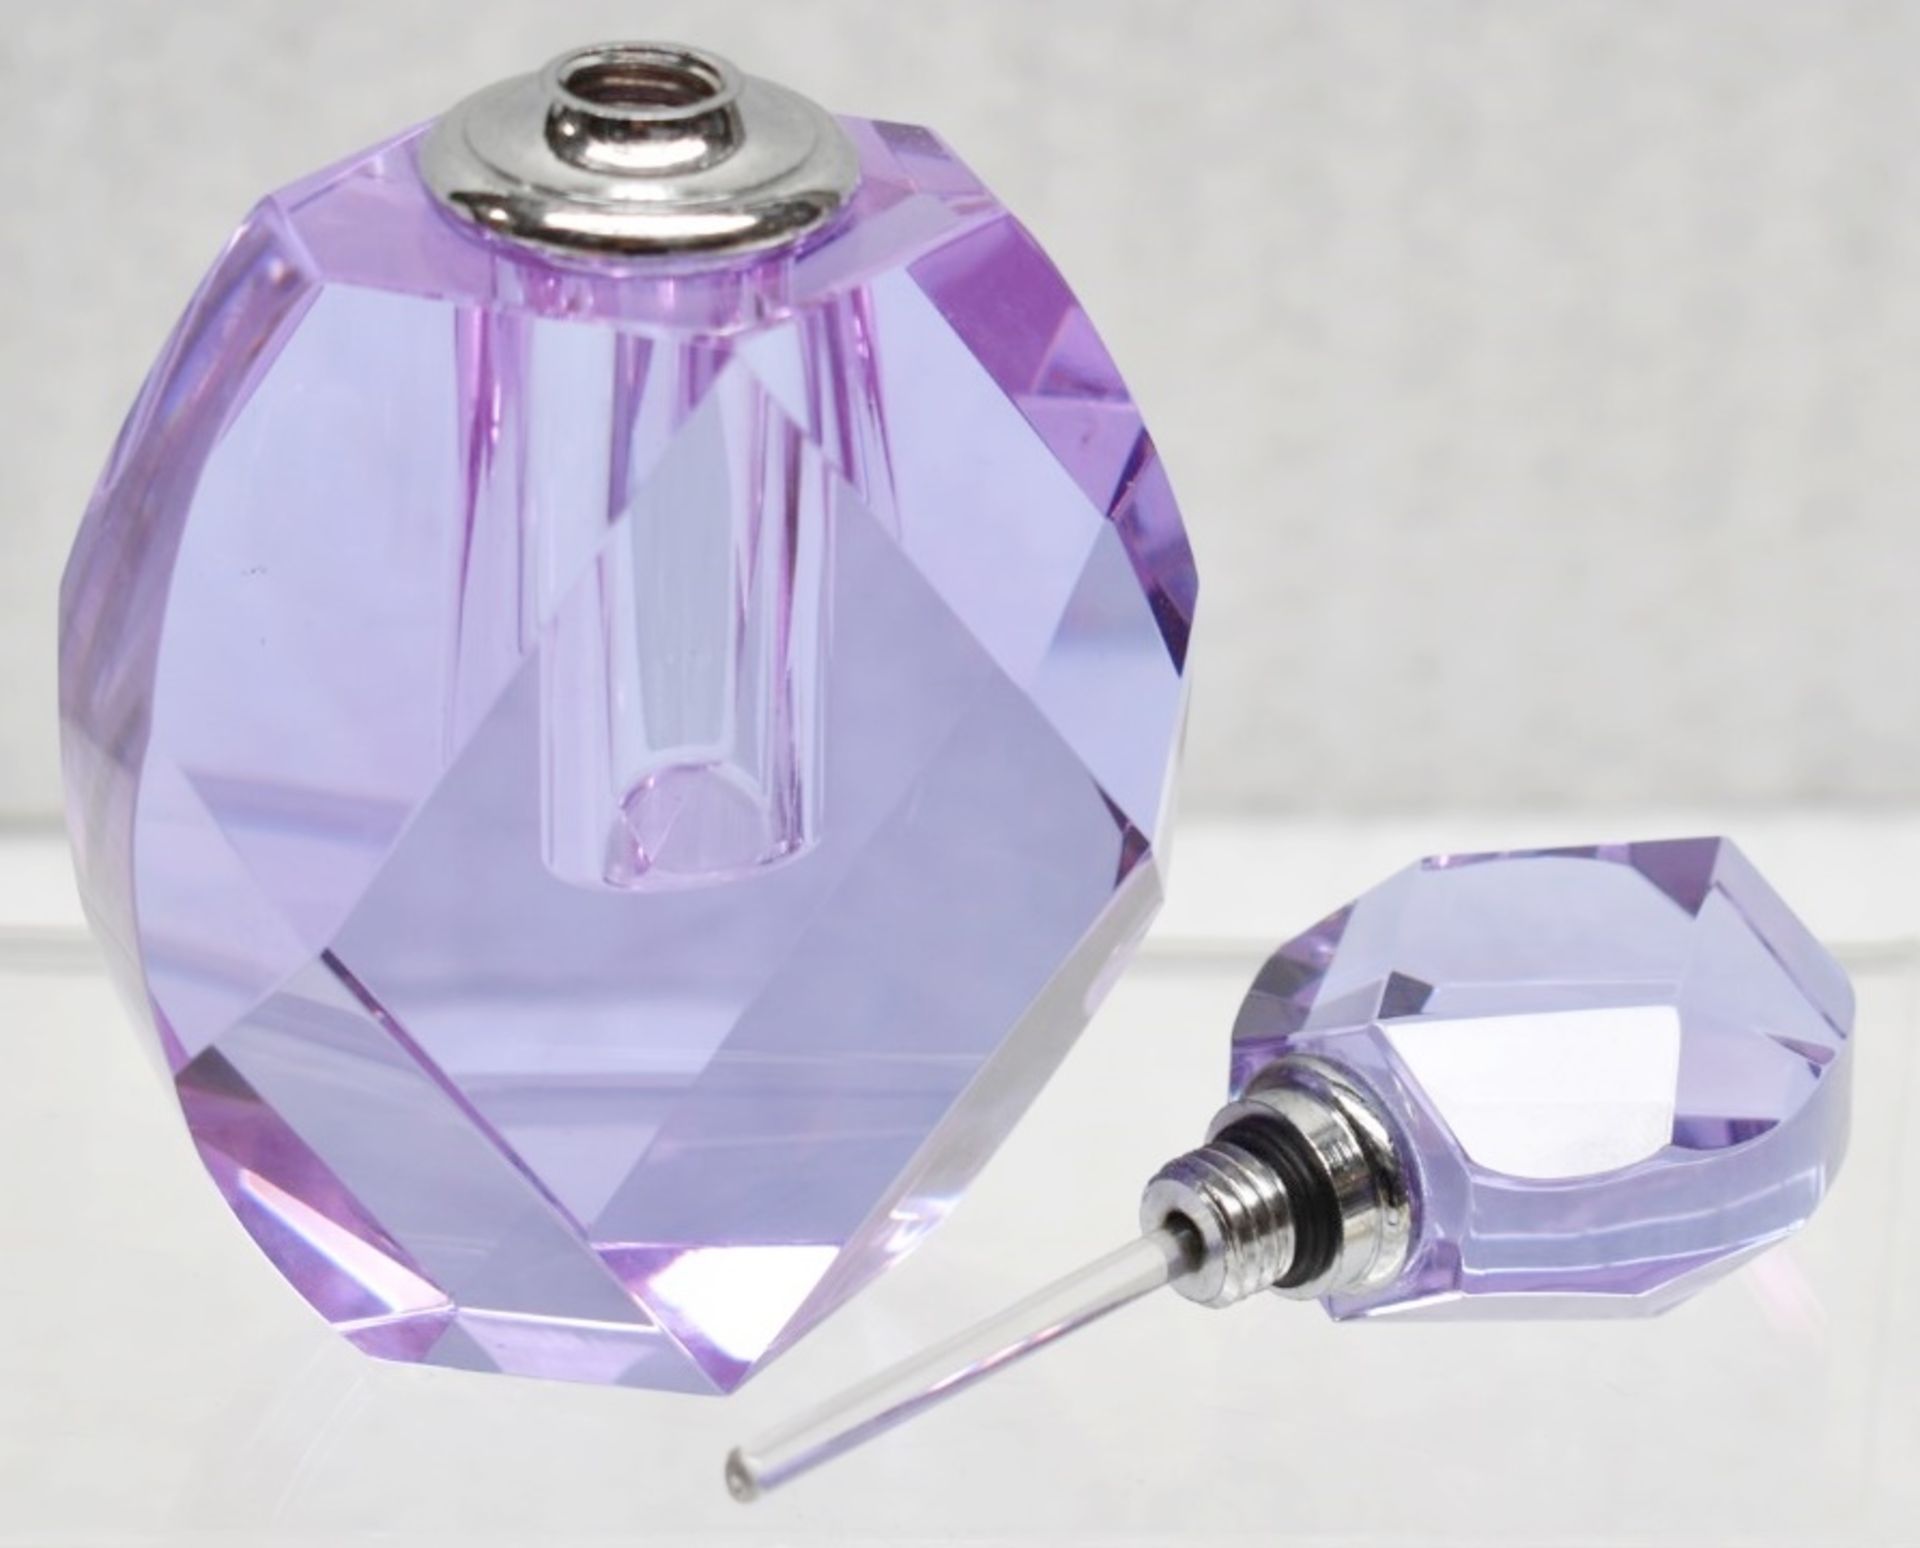 2 x Vintage-Style Cut Glass Perfume Bottles In Purple / Pink - Image 2 of 5